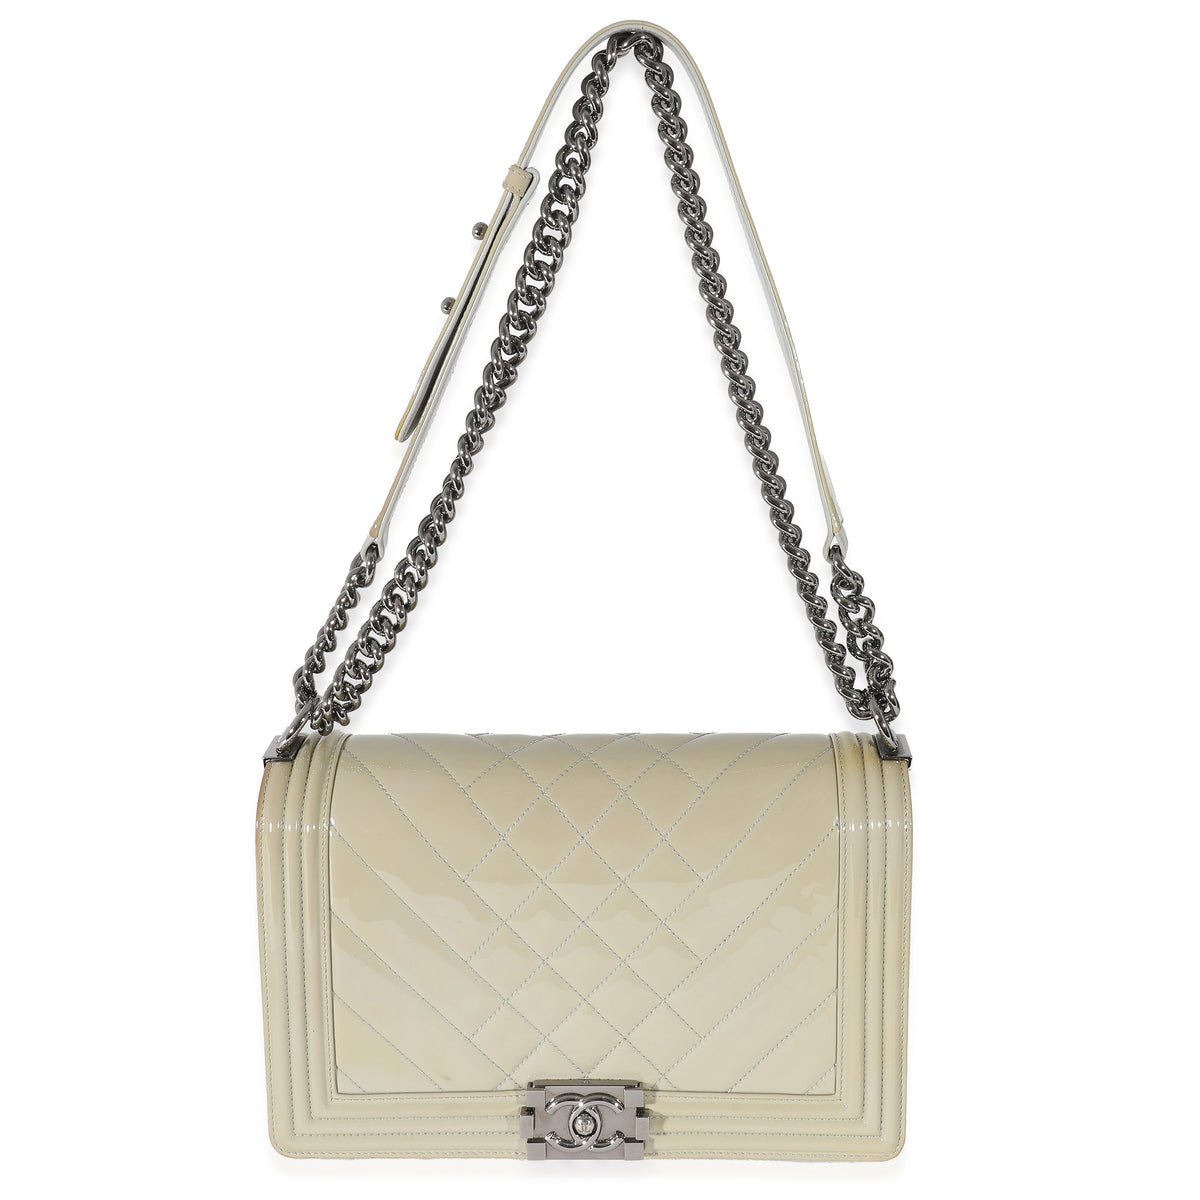 Chanel Grey Patent Leather Quilted Medium Boy Bag